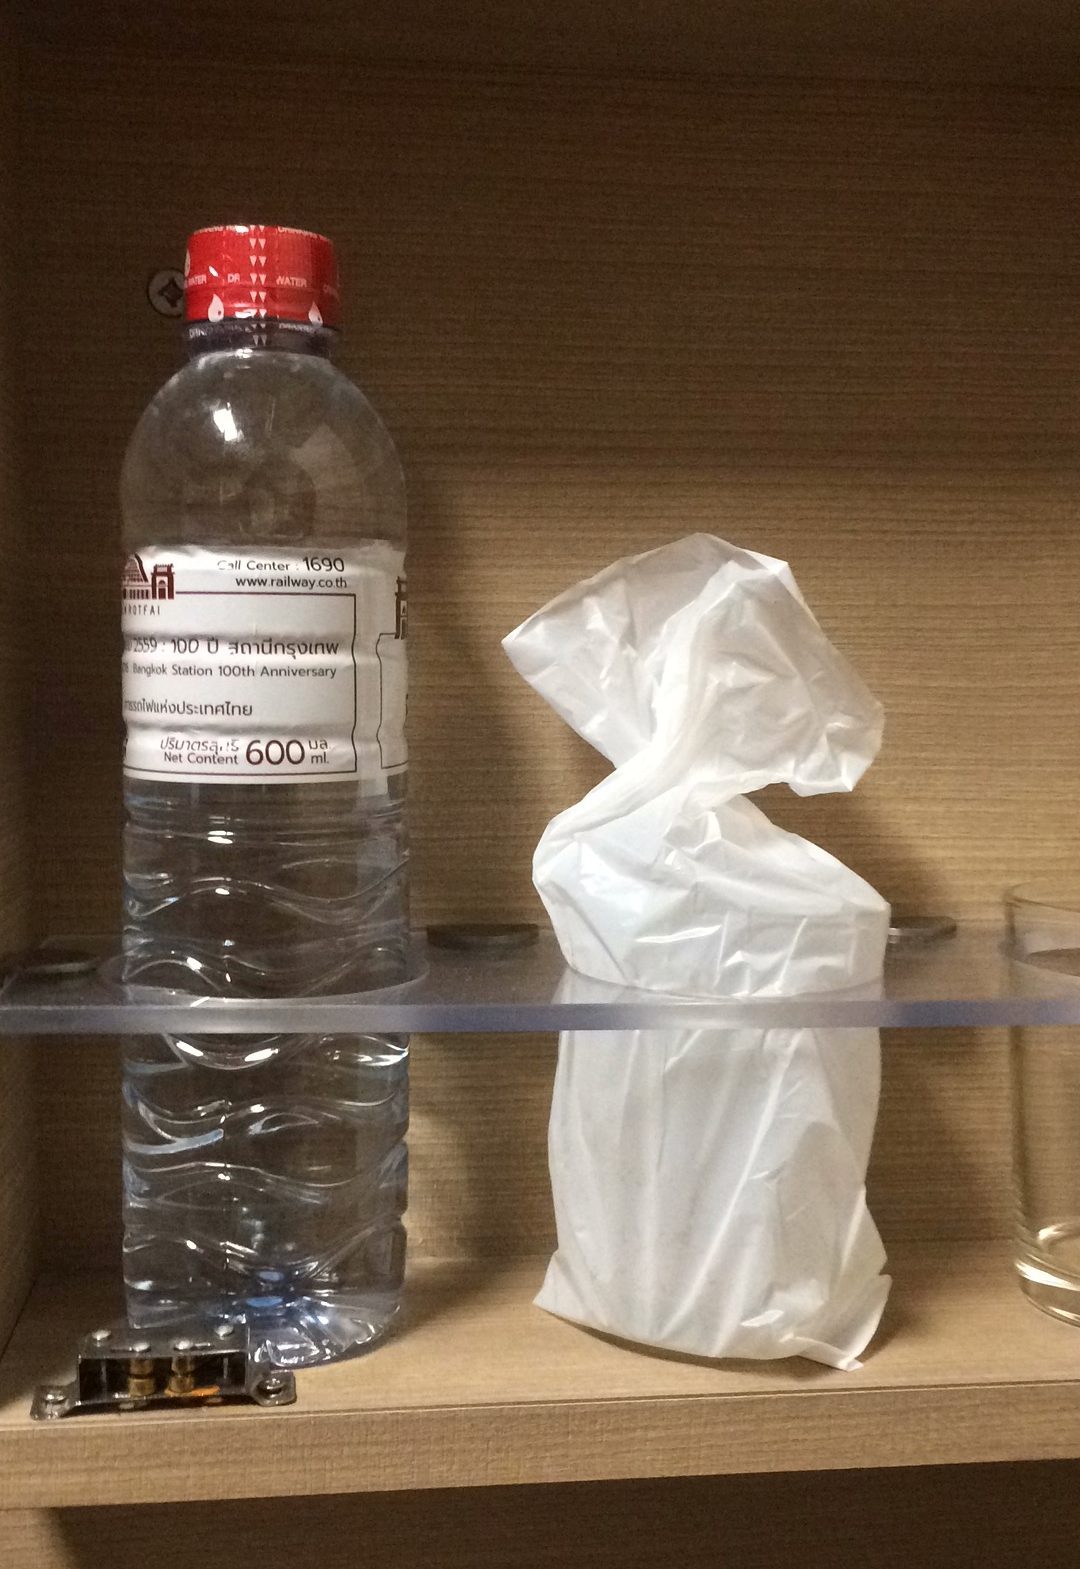 a plastic bottle and a tissue paper bag on a shelf